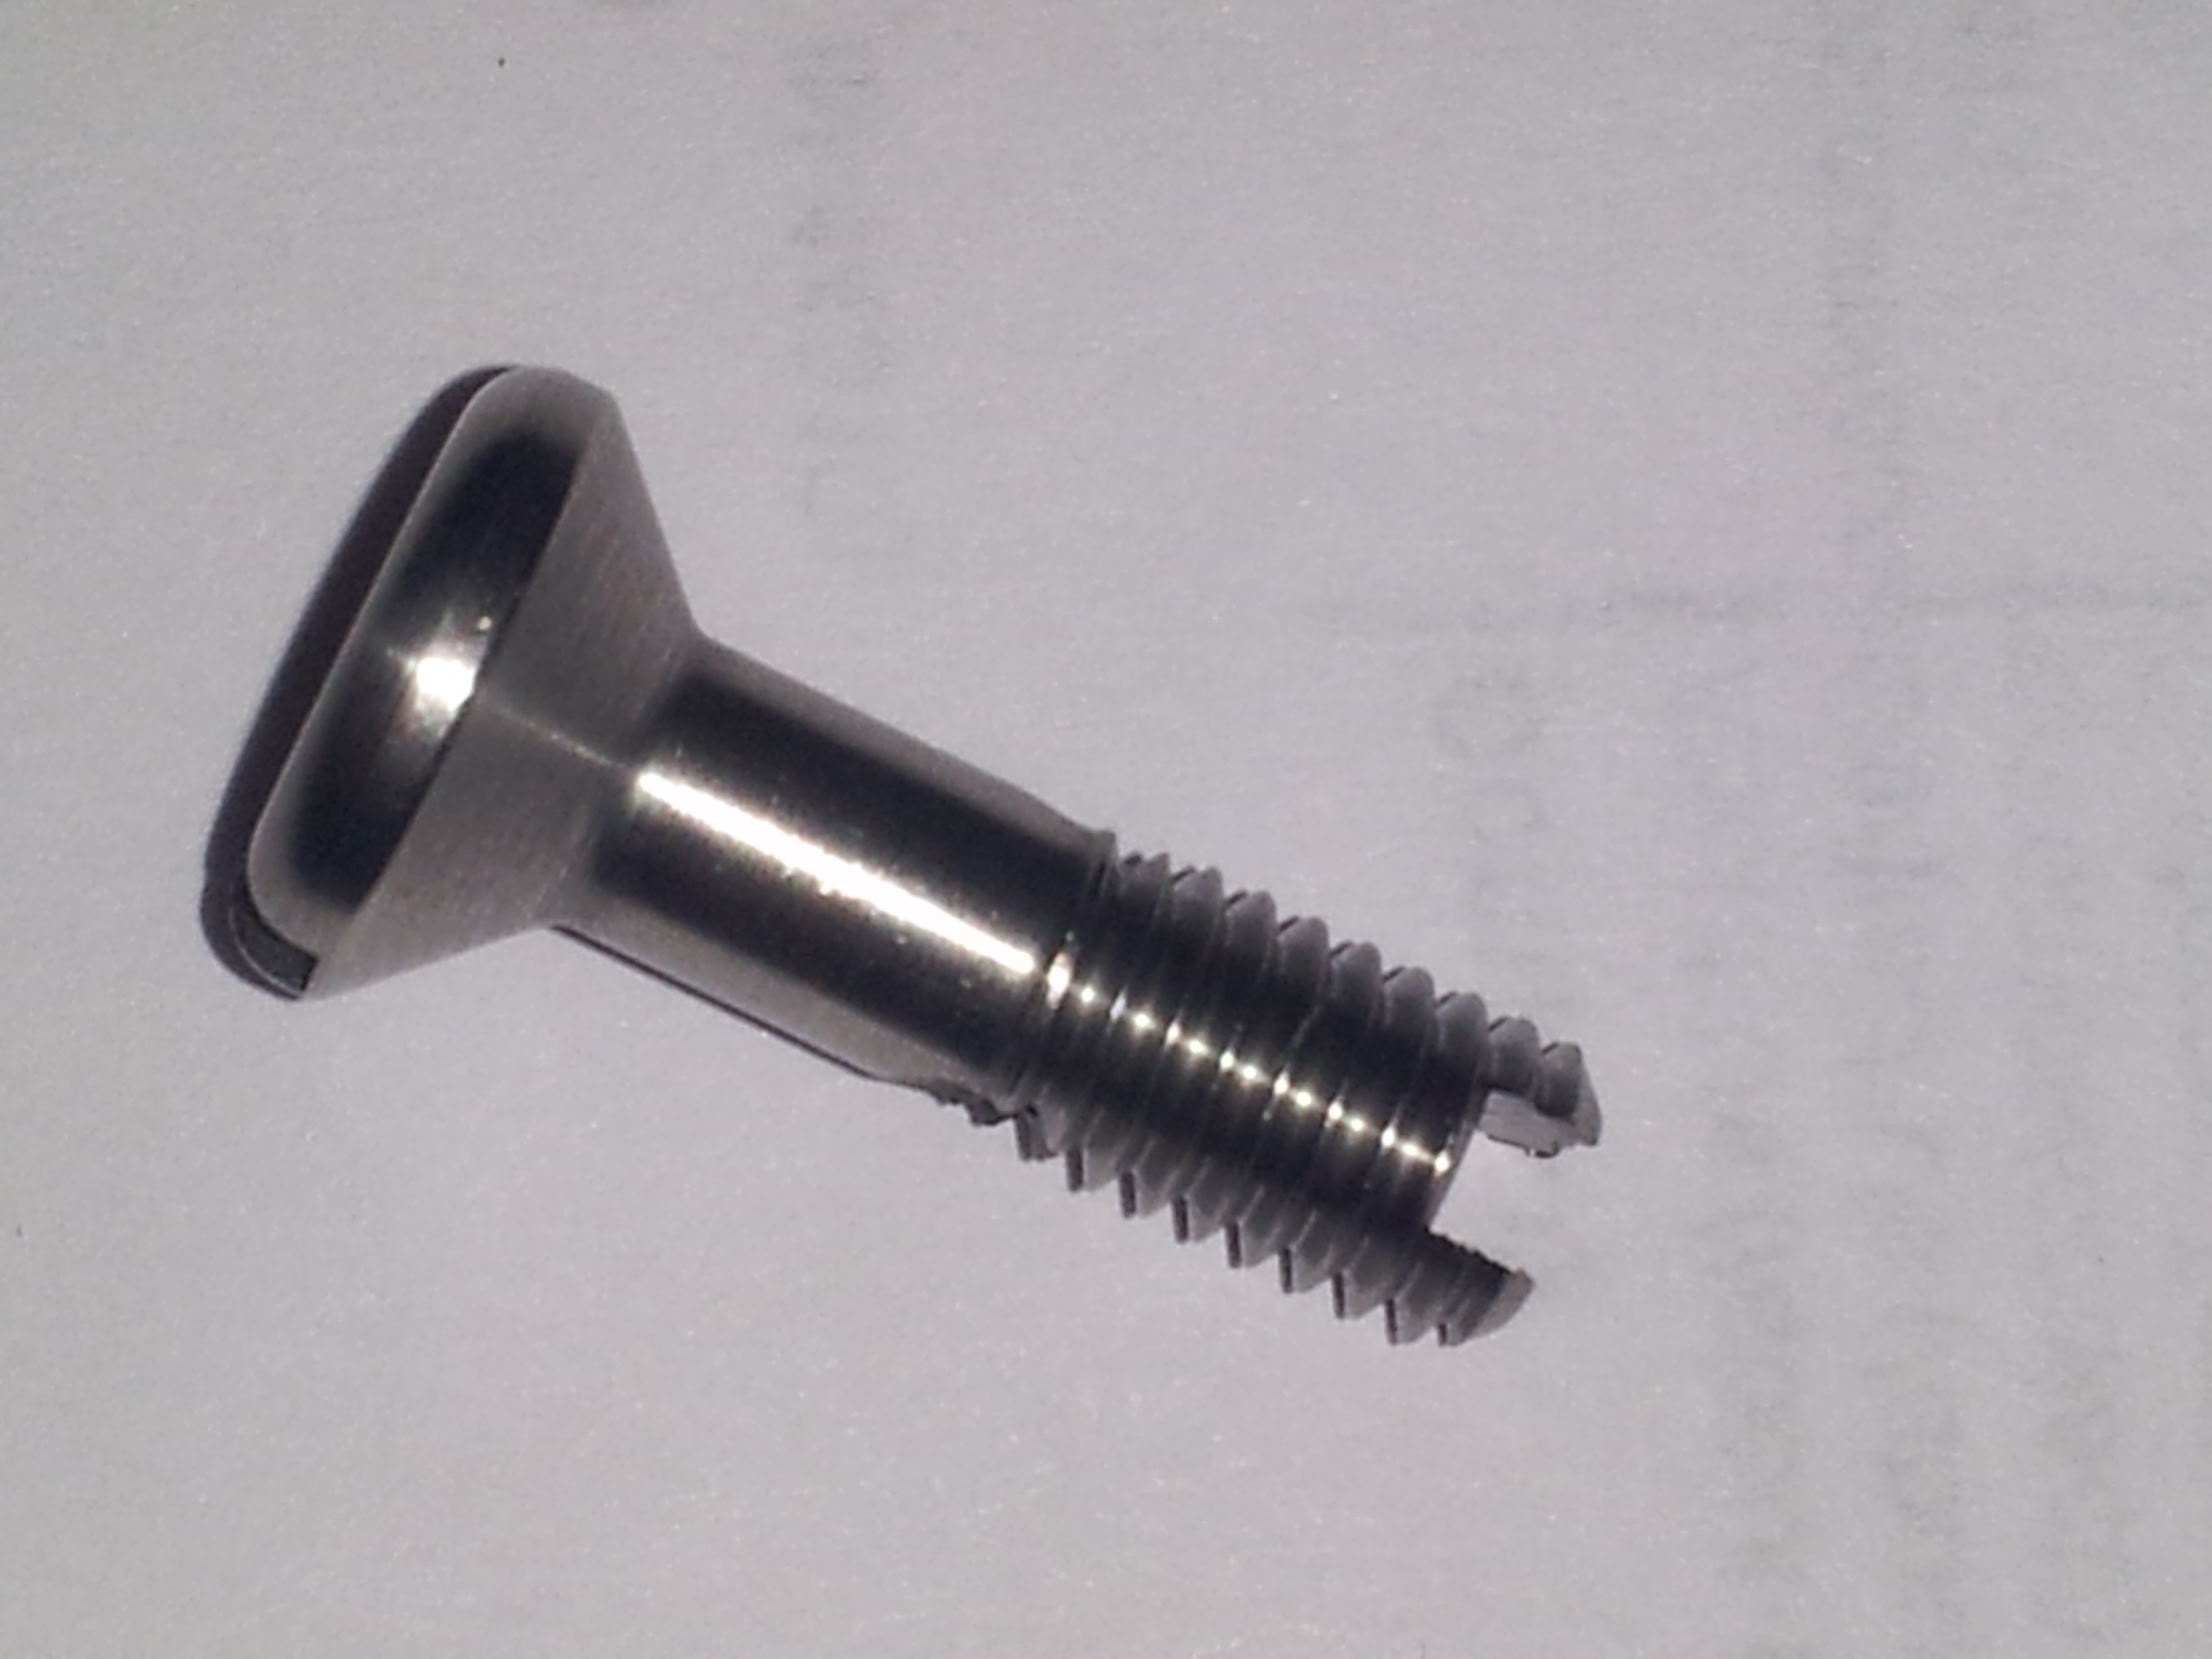 High Volume Pump nozzle screw, stainless steel hollow-head